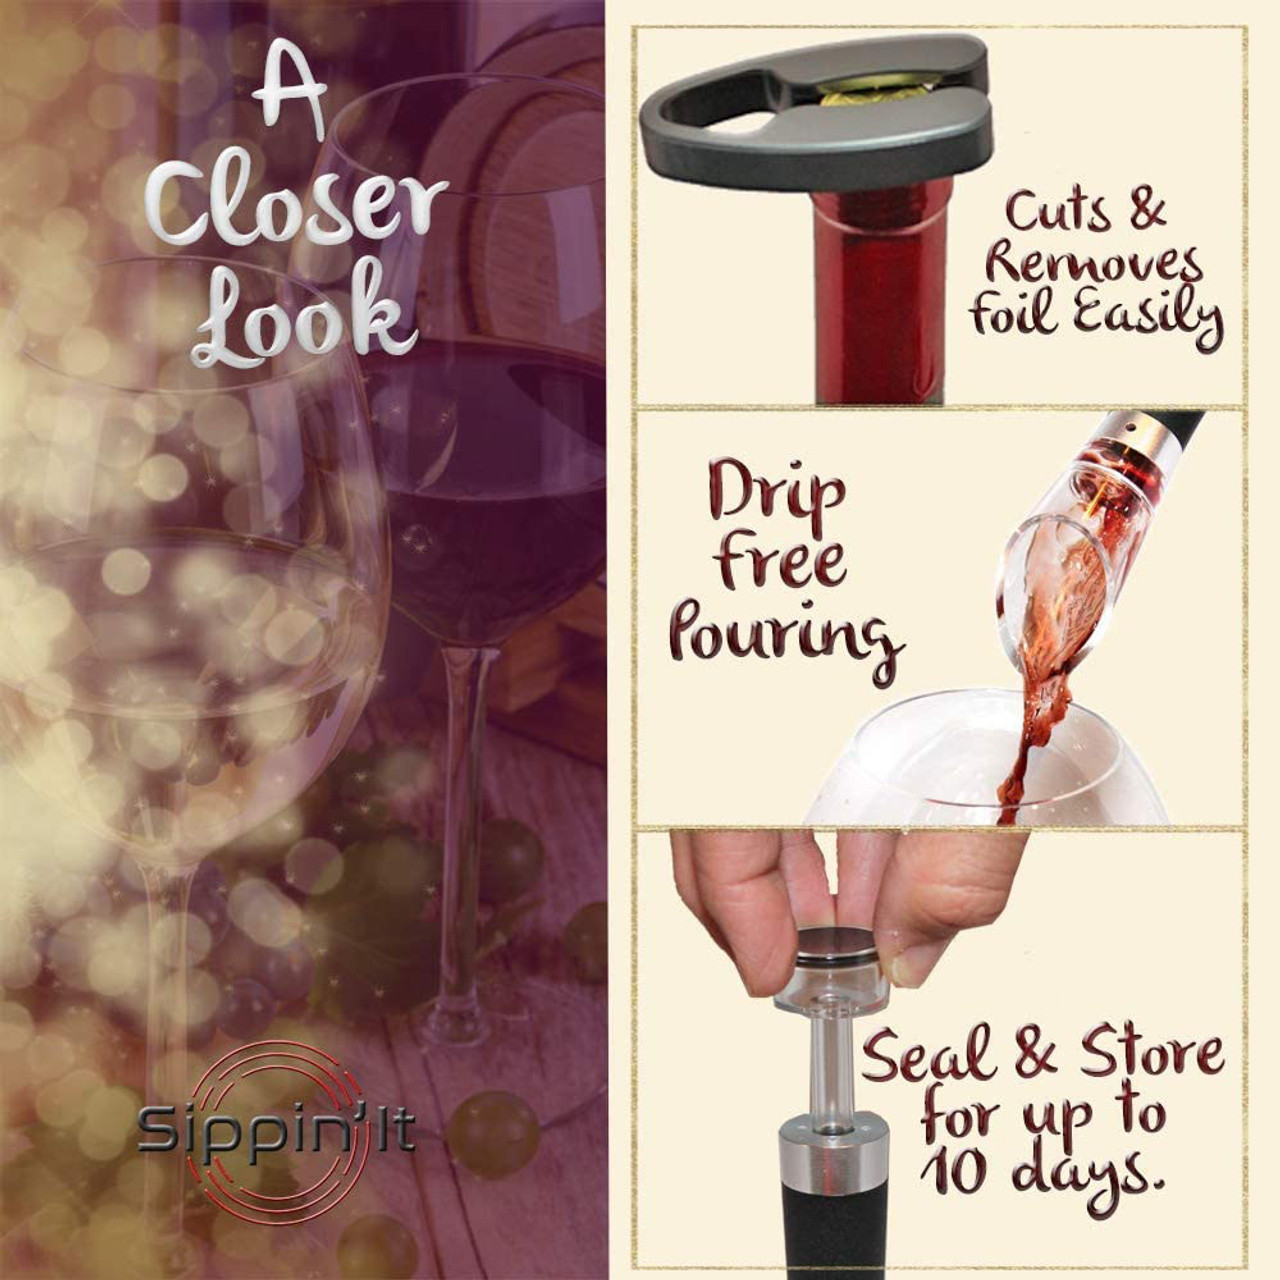 Sippin' It Air Pressure Wine Bottle Opener with Accessories product image